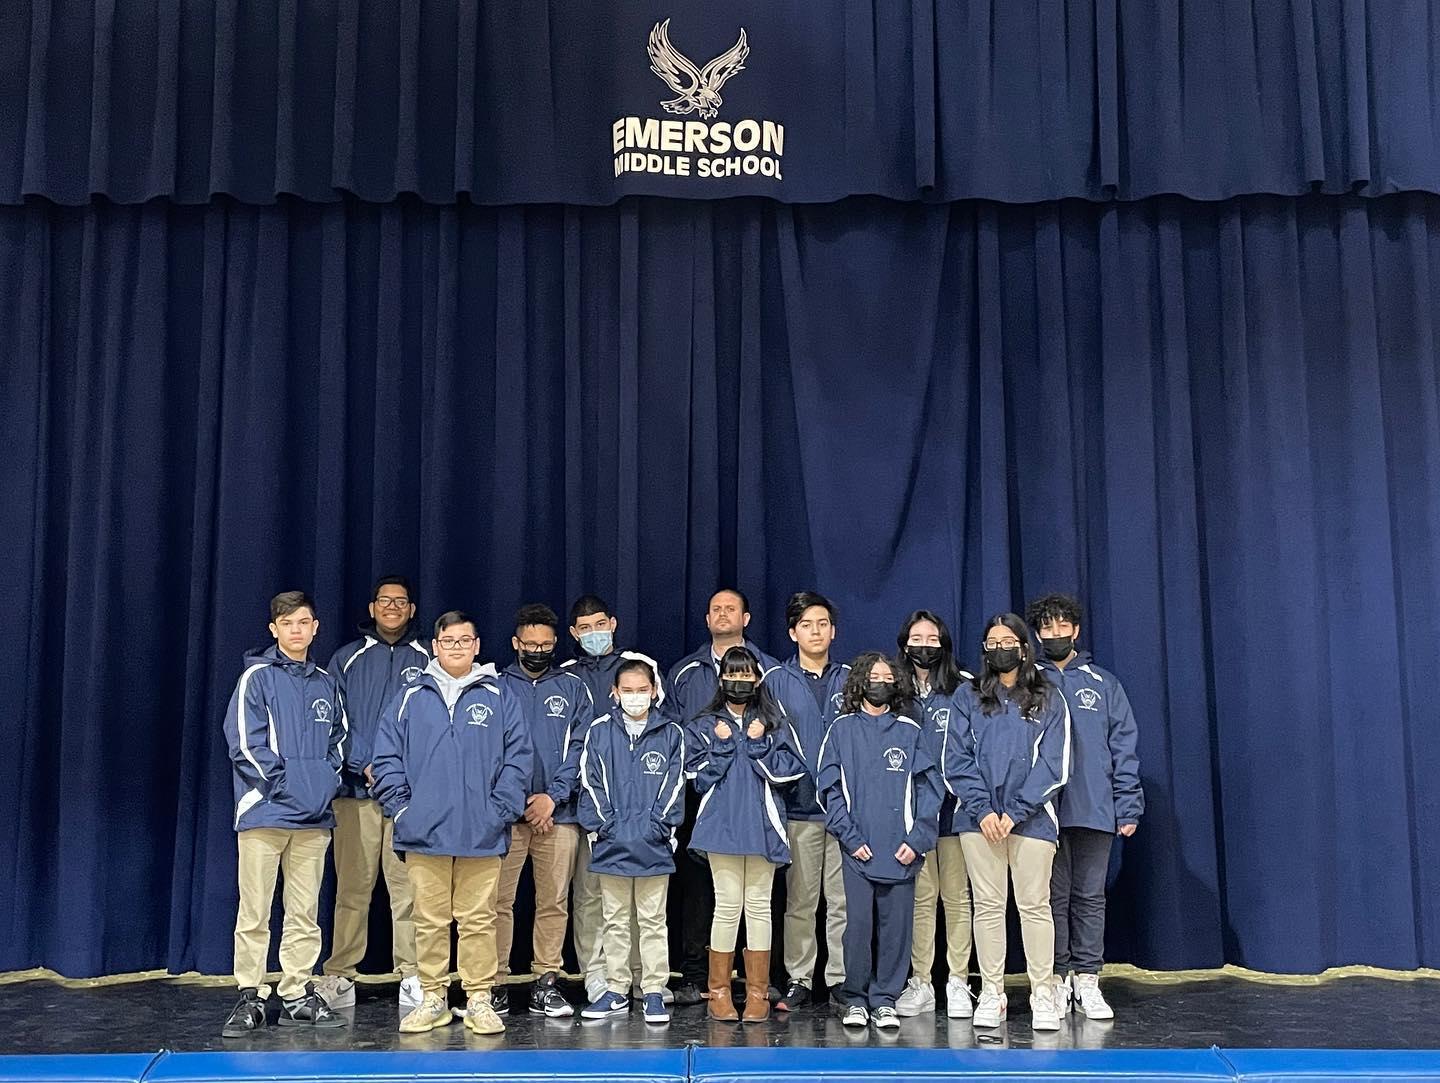 One of Emerson Middle School’s newest programs, our E-Sports Gamers Club, received their official E-Sports jackets #1